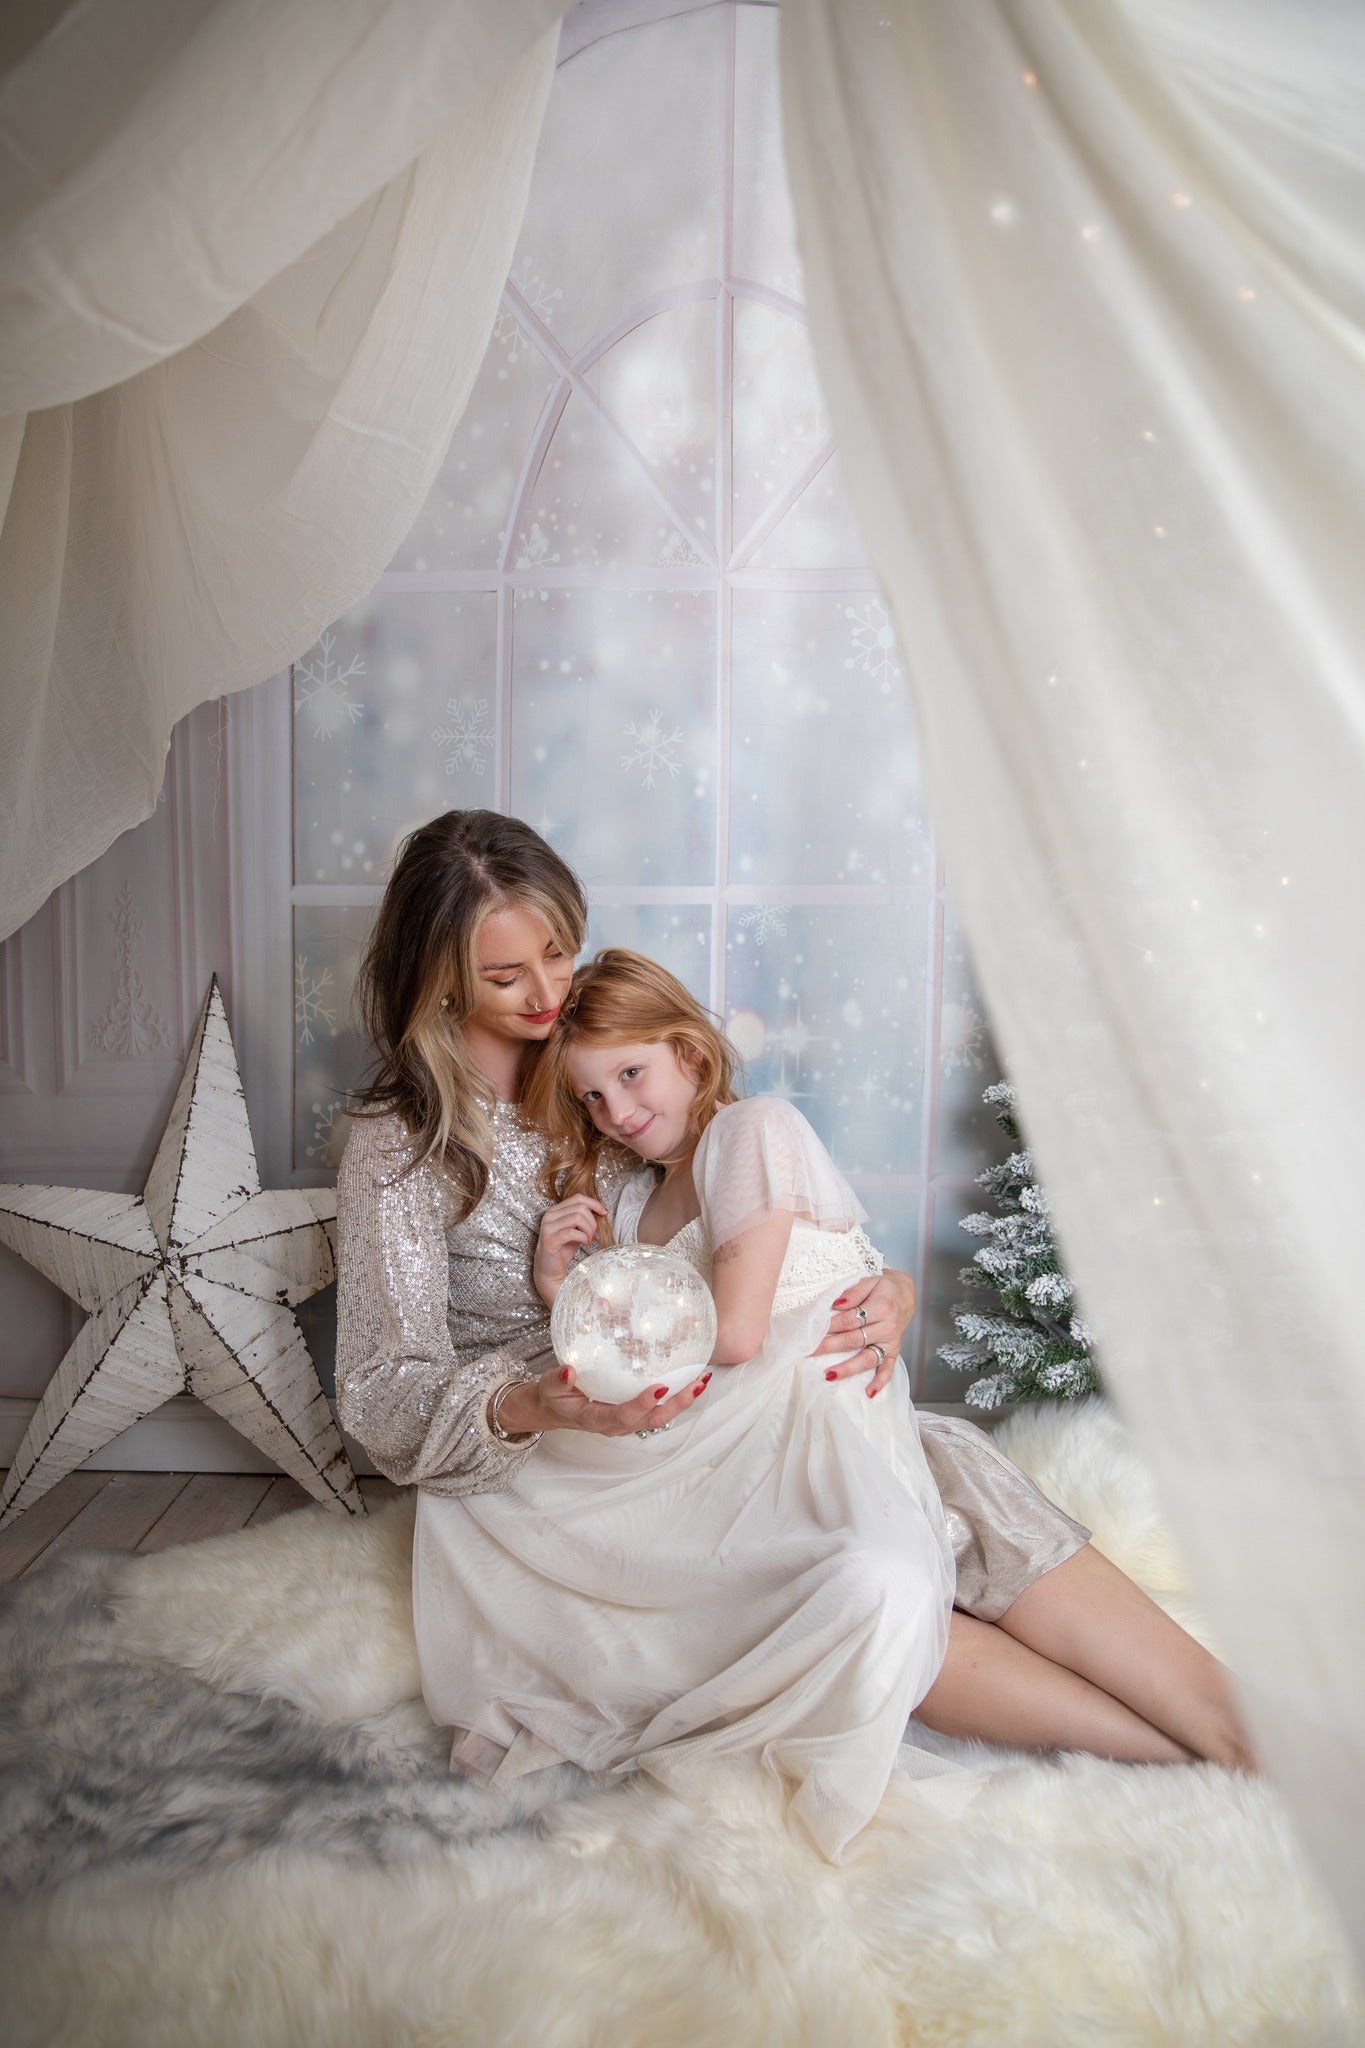 Kate Window Snowflake Backdrop Winter White Curtains for Photography